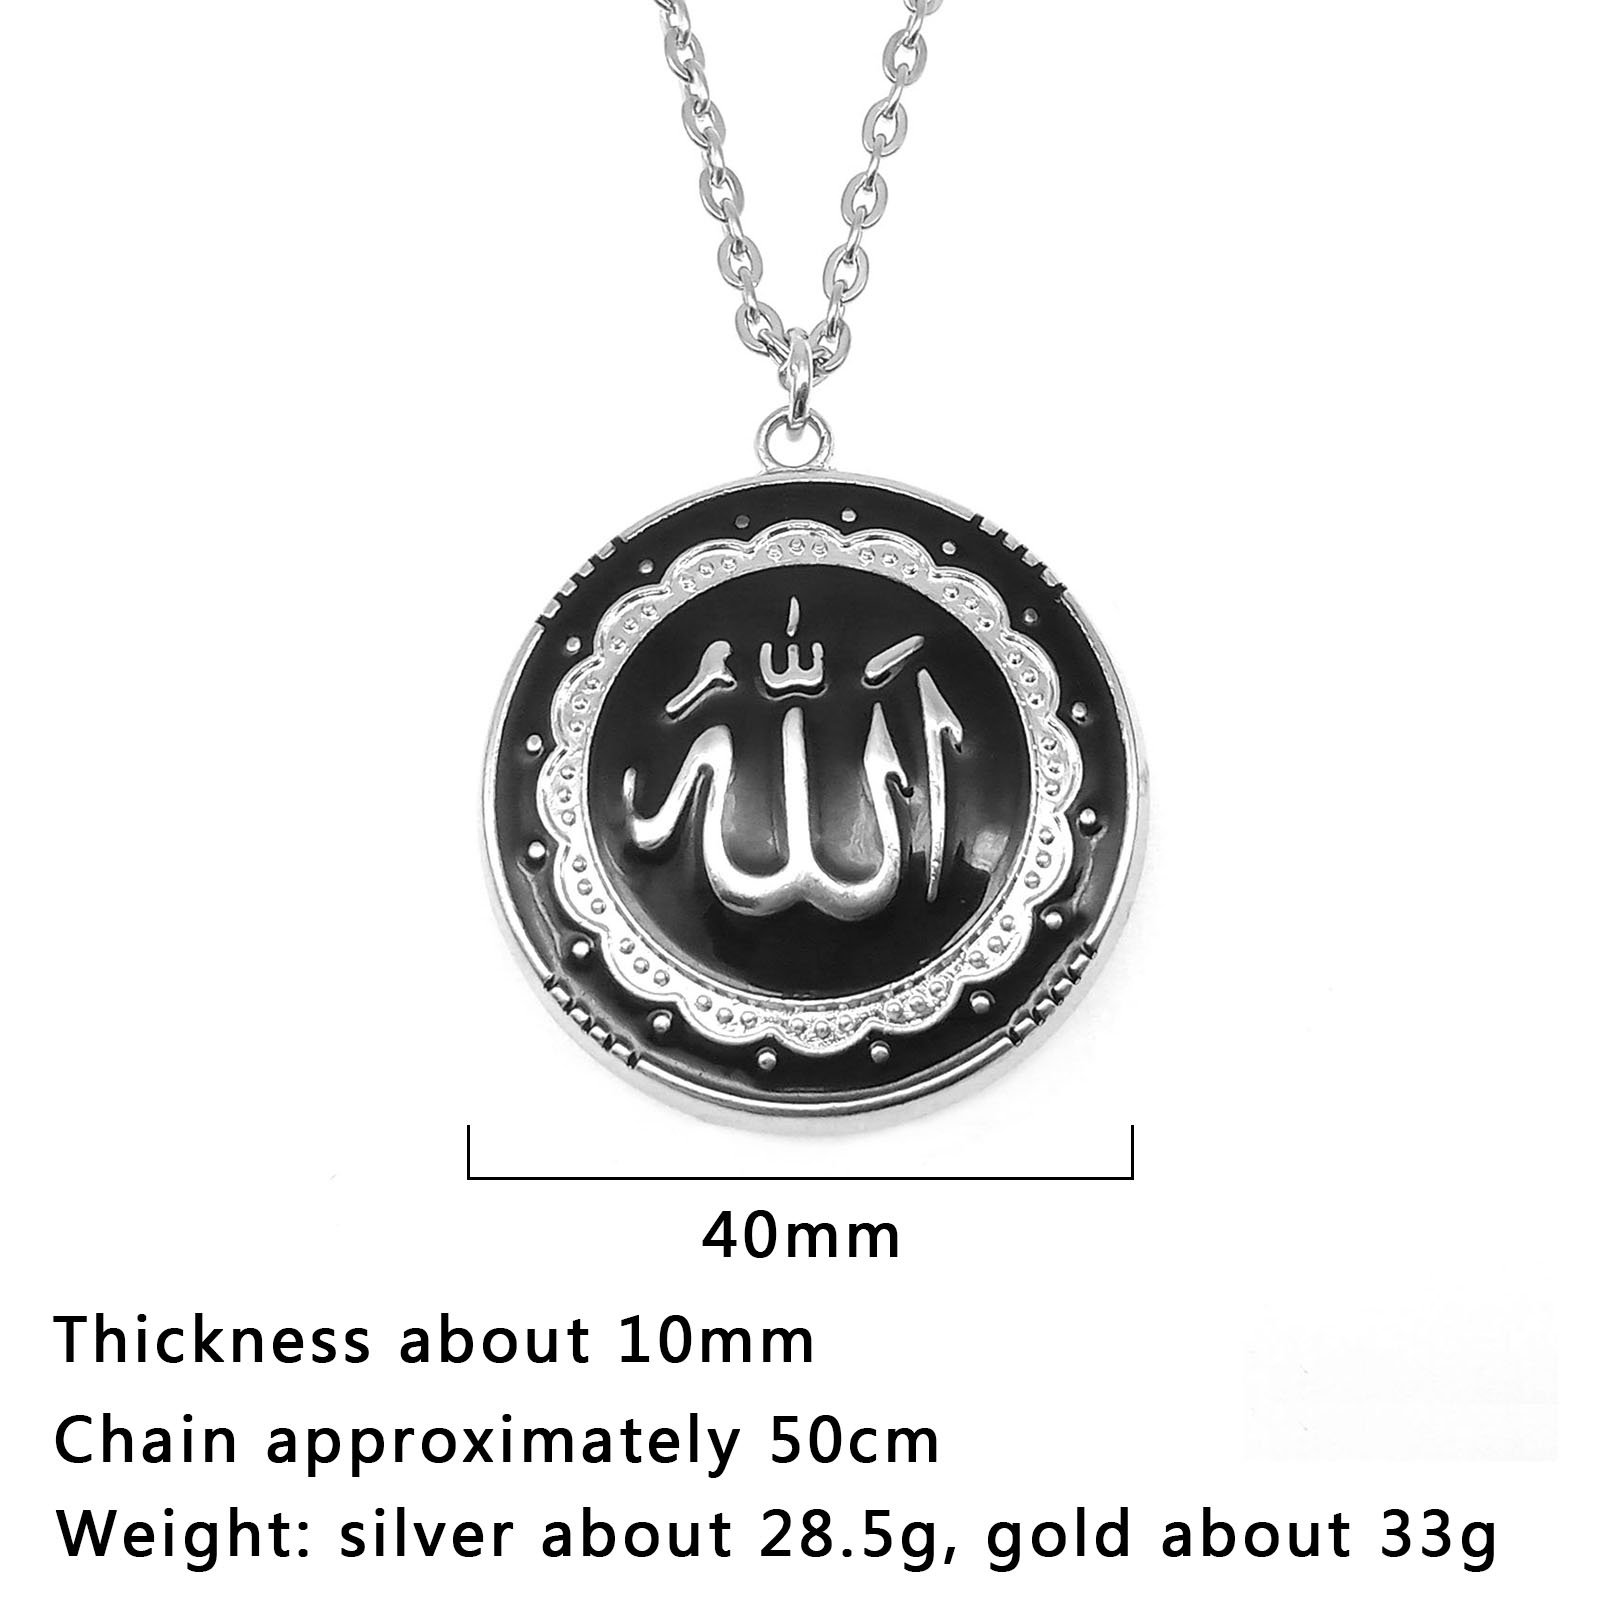 1:about 50cm chain